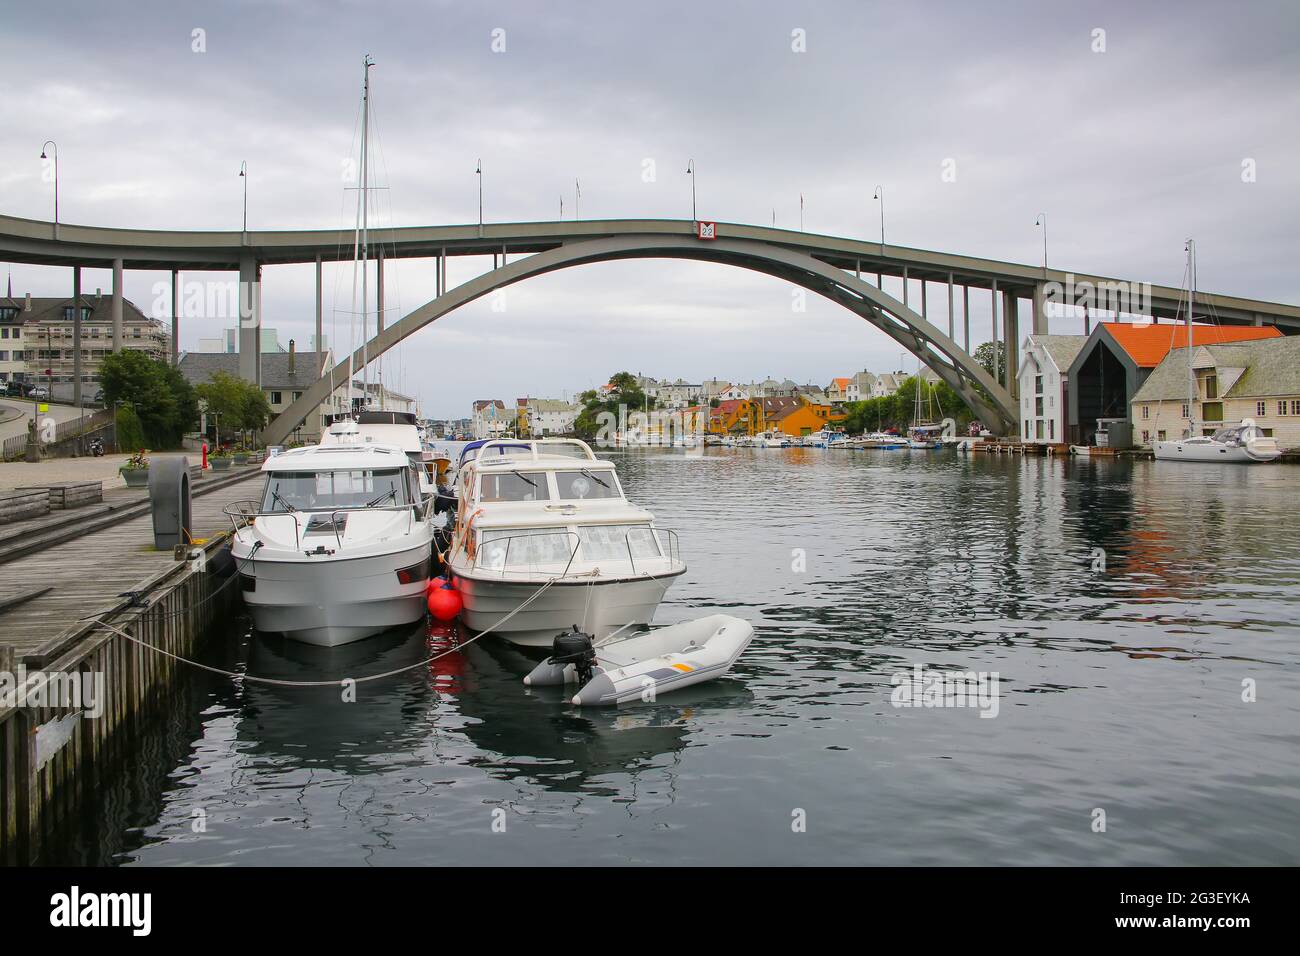 Risoy bridge over the river in the center of the town. Surrounded by traditional buildings and boats in the water, Haugesund, Norway. Stock Photo